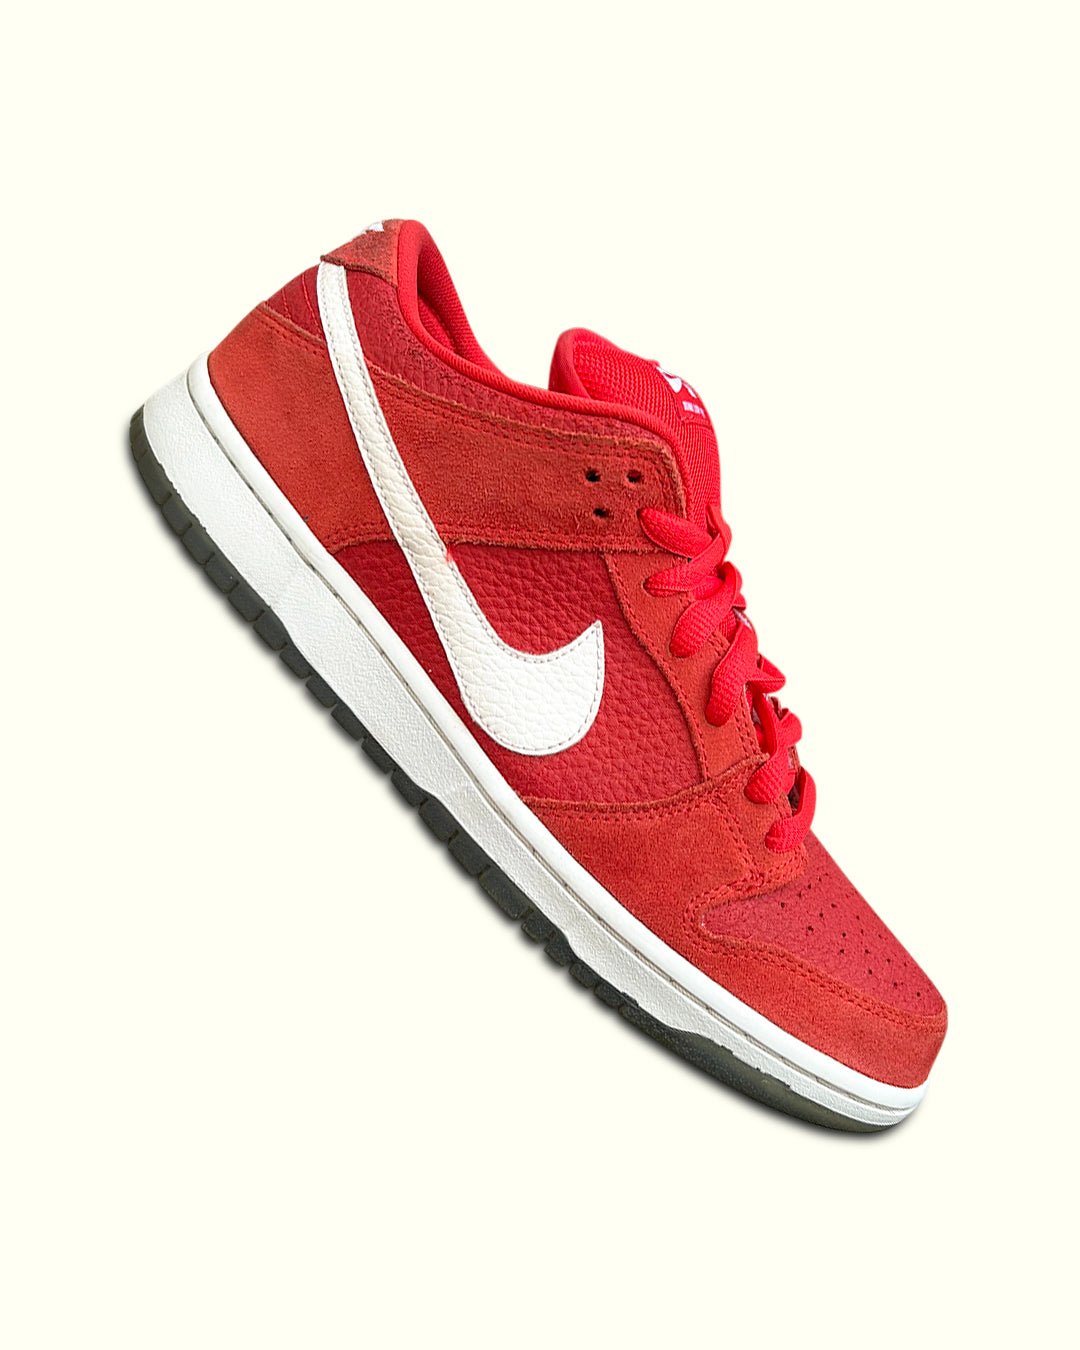 2012 Nike SB Dunk Low Challenge Red (US10.5)